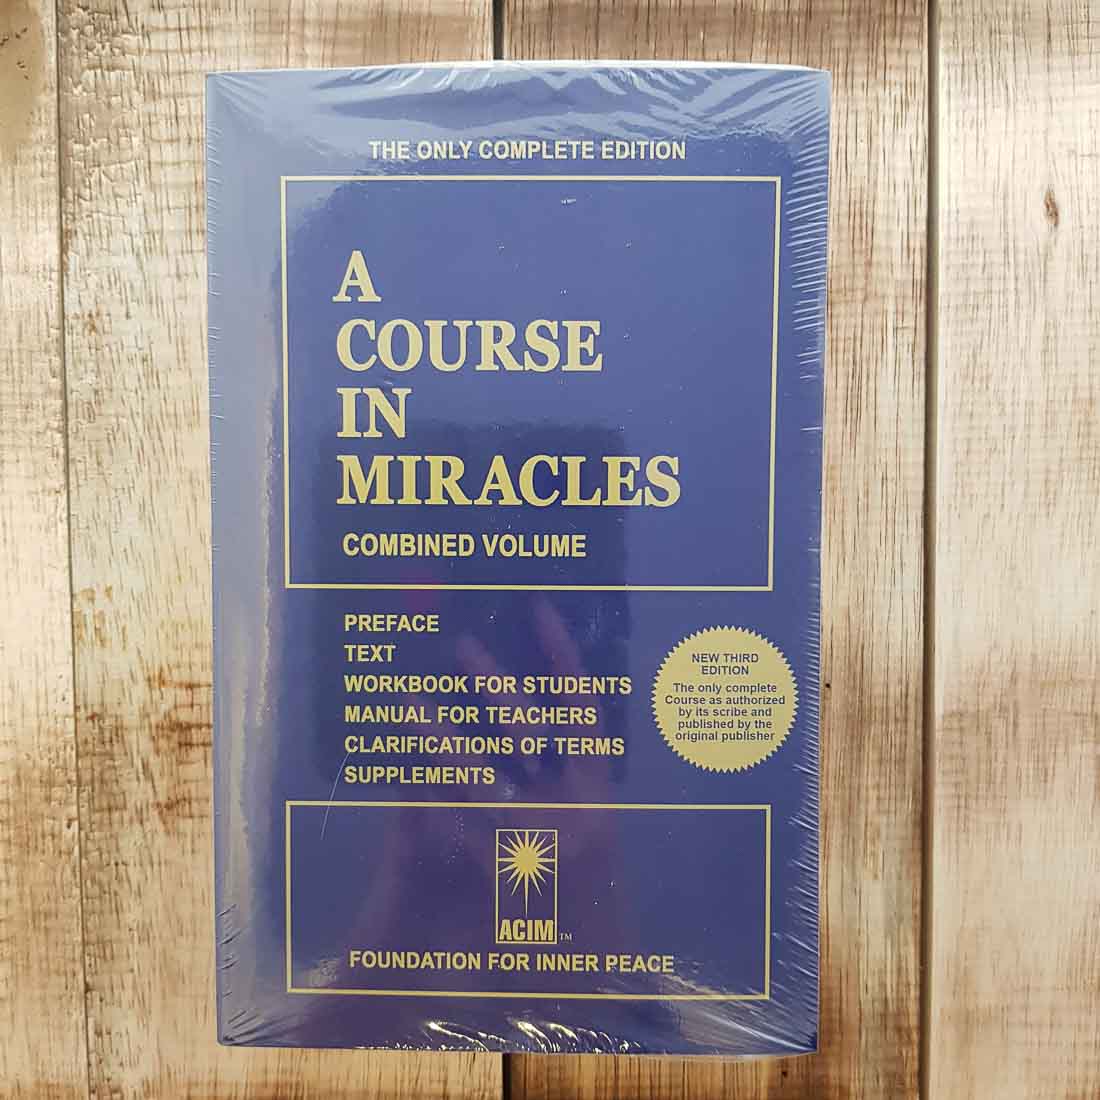 The Illusion of Choice and A Course in Miracles (ACIM)